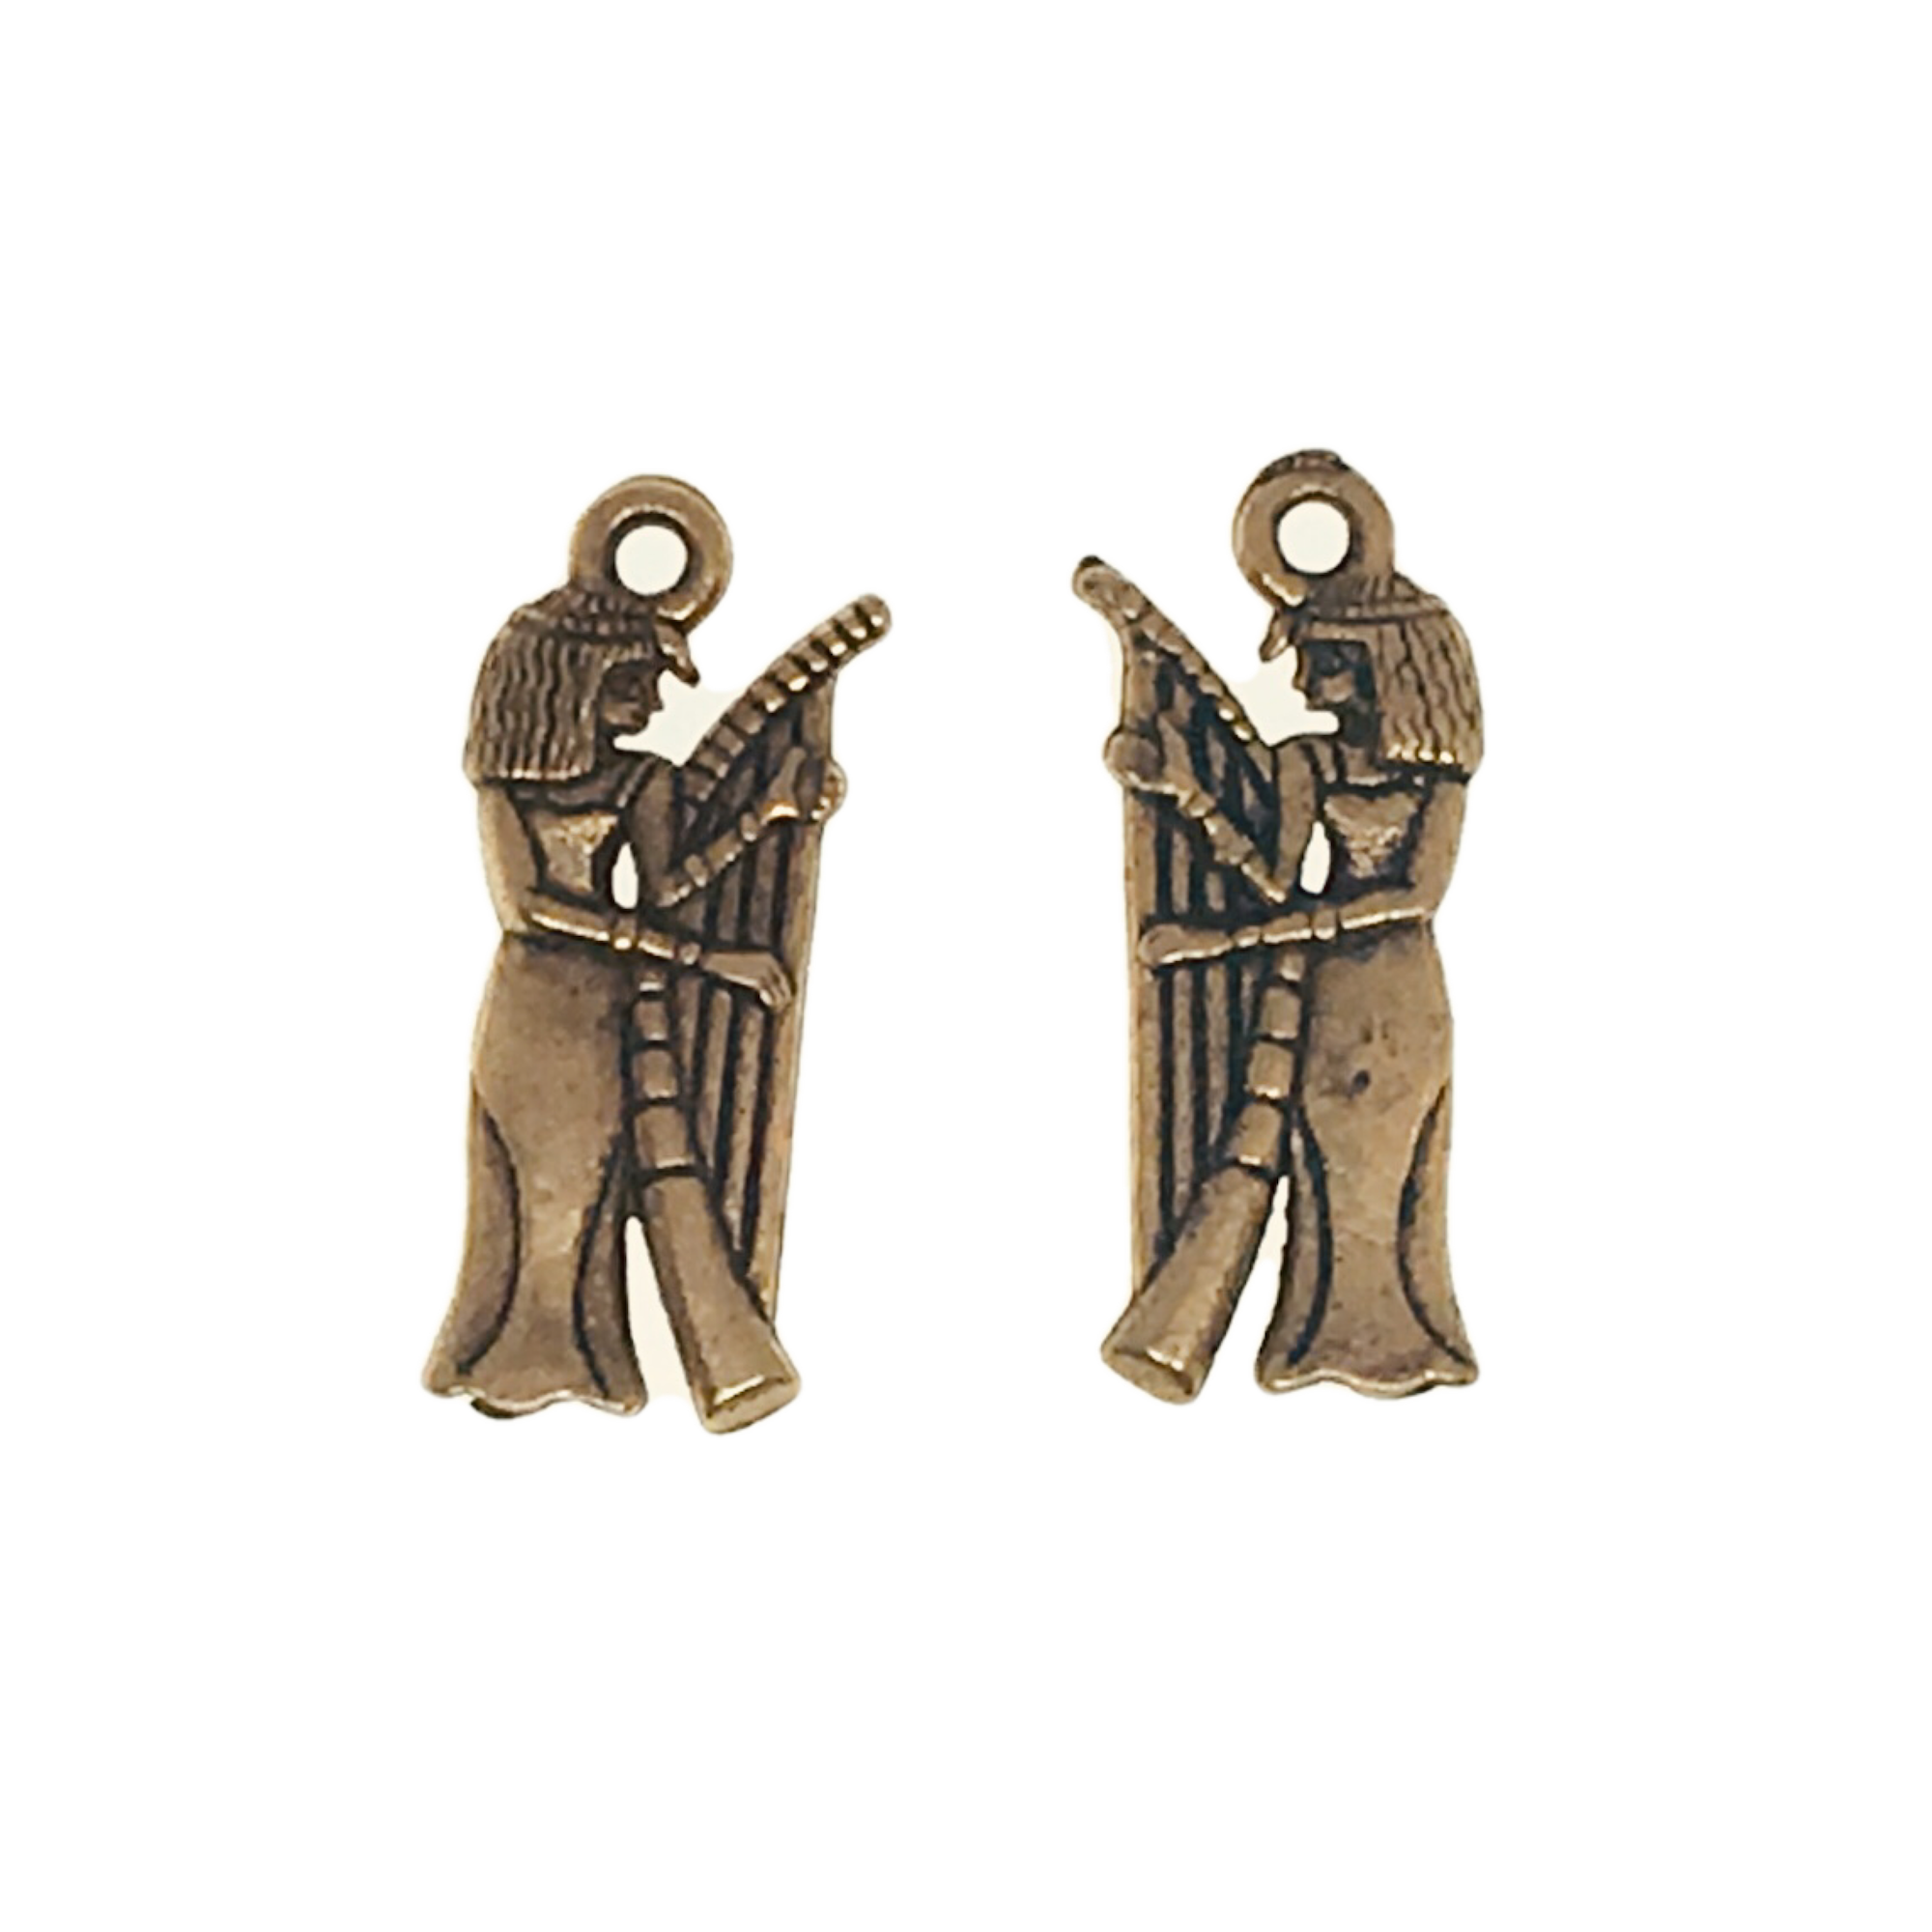 Egyptian Musician Charms - Qty of 5 - 24kt Gold Plated Lead Free Plated Pewter - American Made